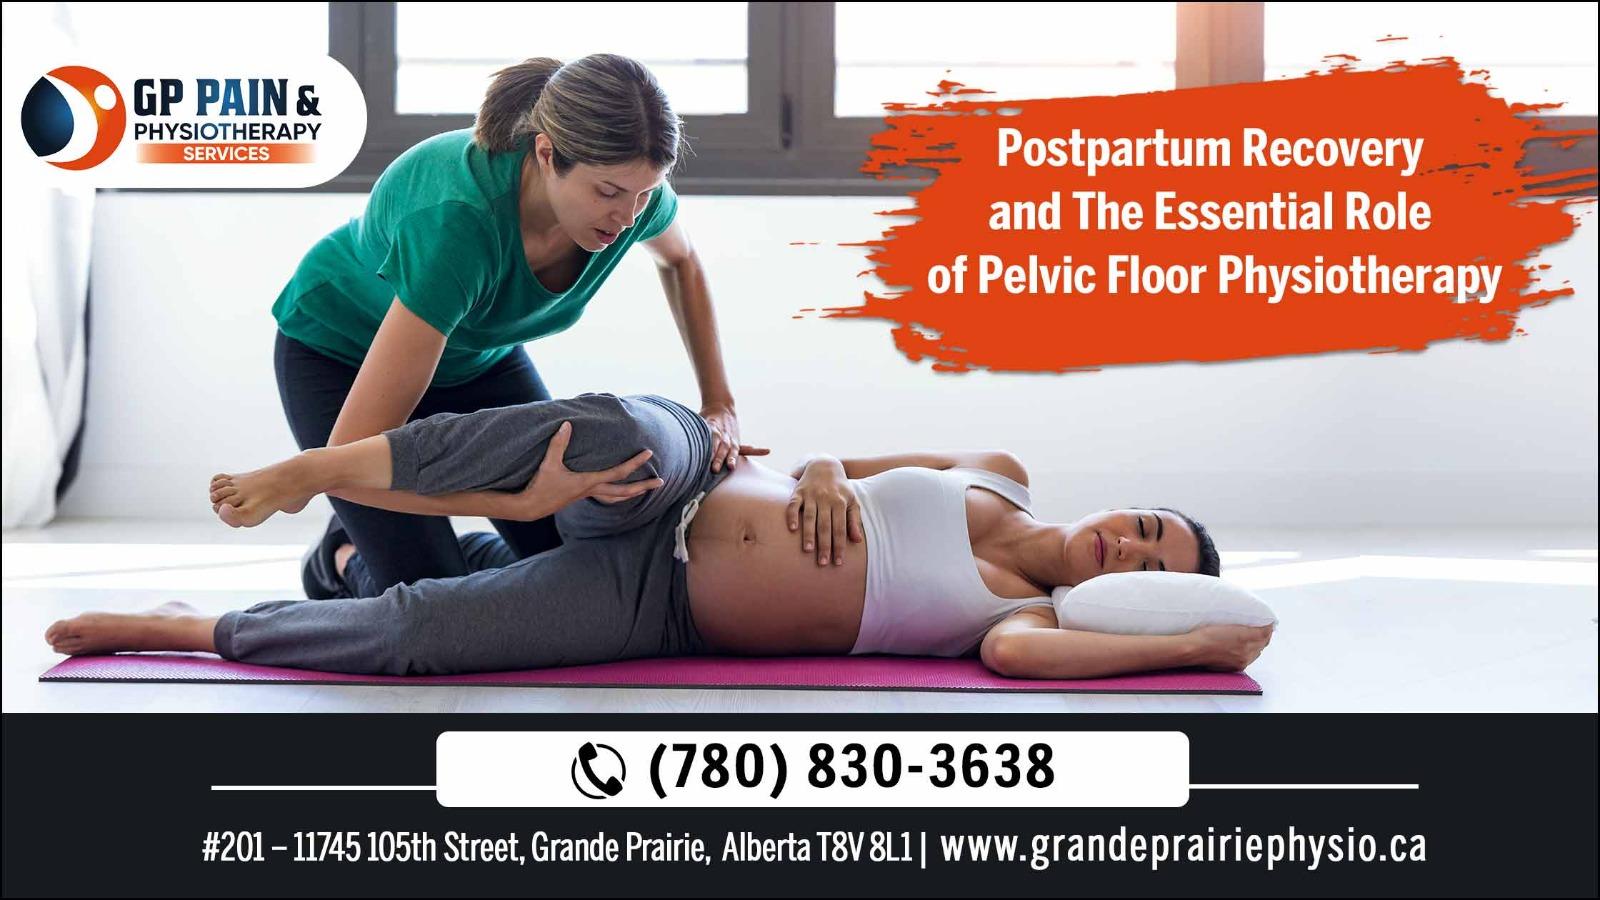 Postpartum Recovery and The Essential Role of Pelvic Floor Physiotherapy